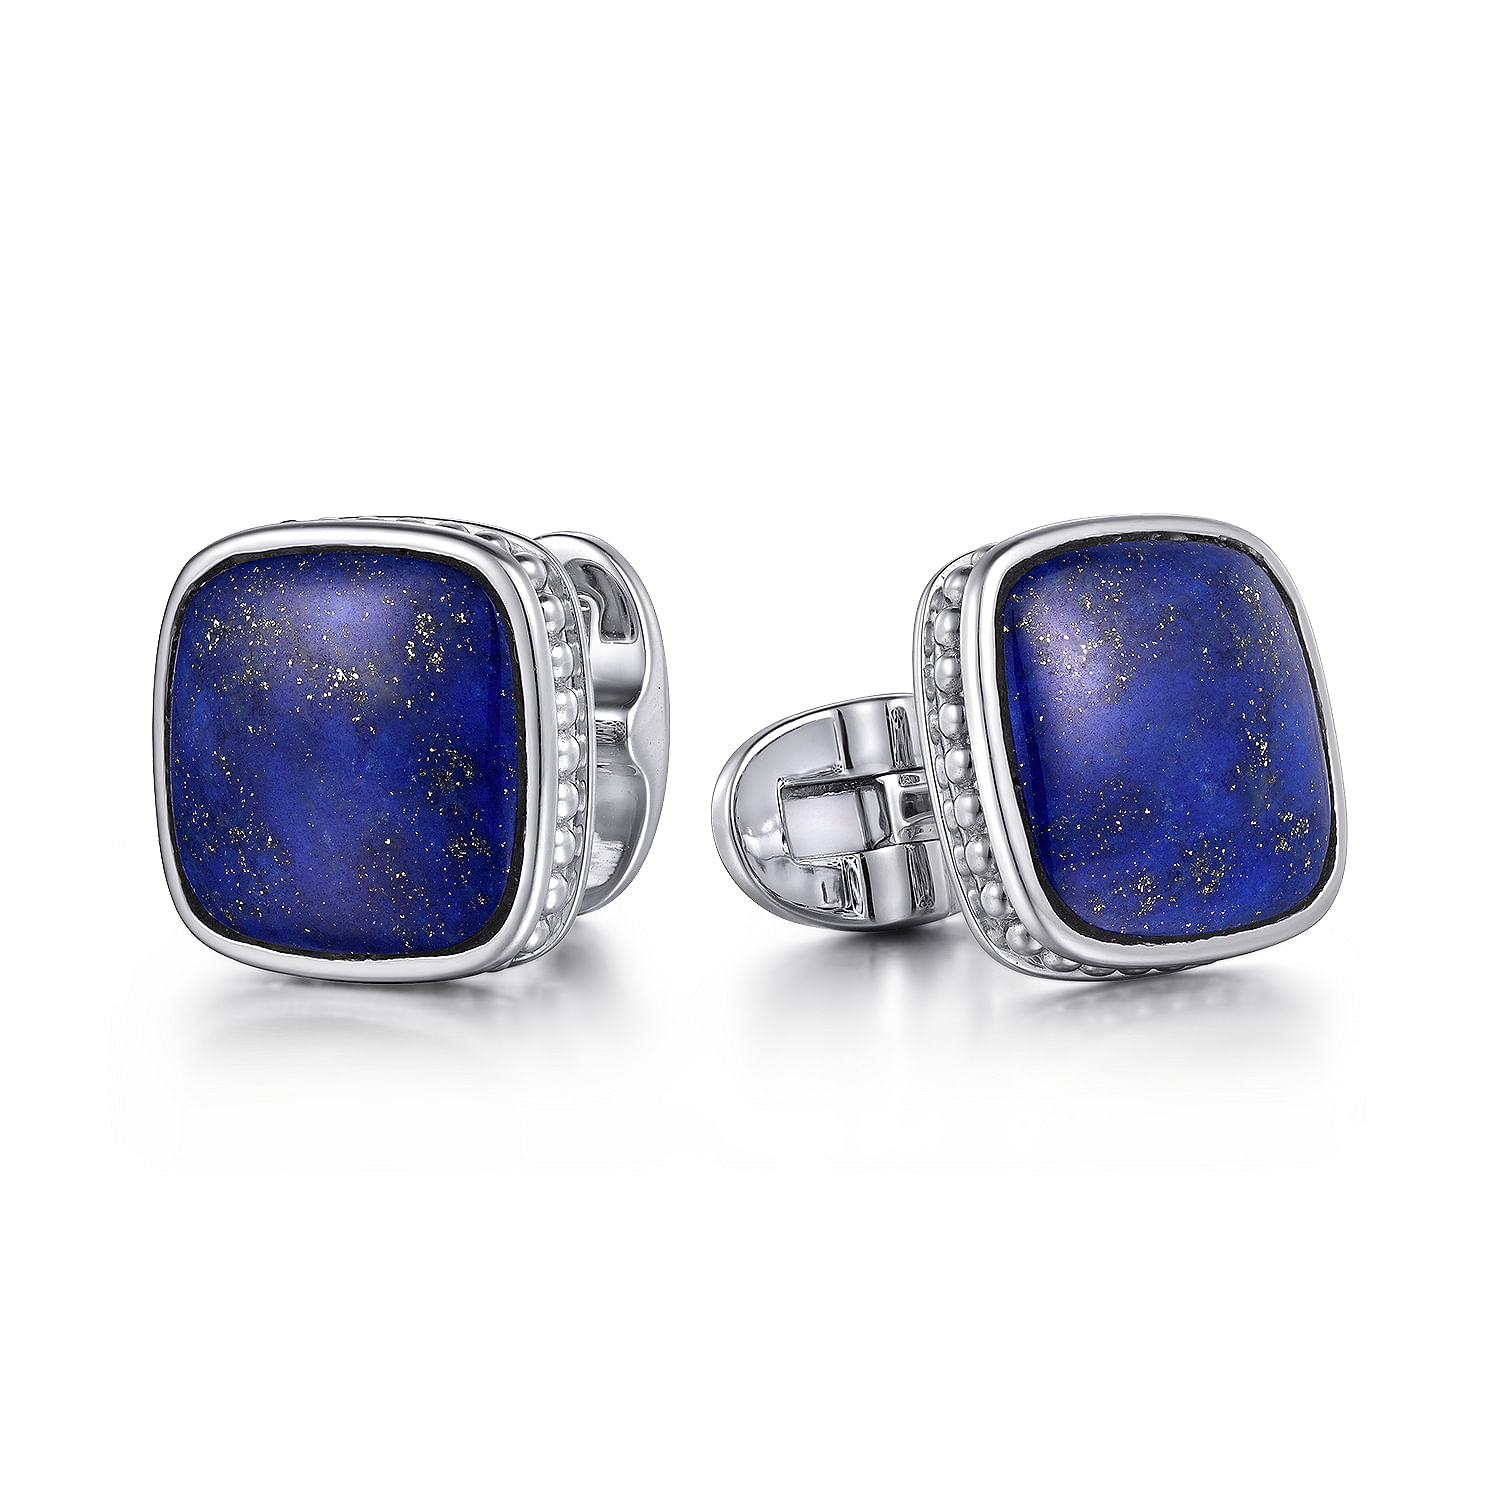 925-Sterling-Silver-Square-Cufflinks-with-Lapis-Stones1